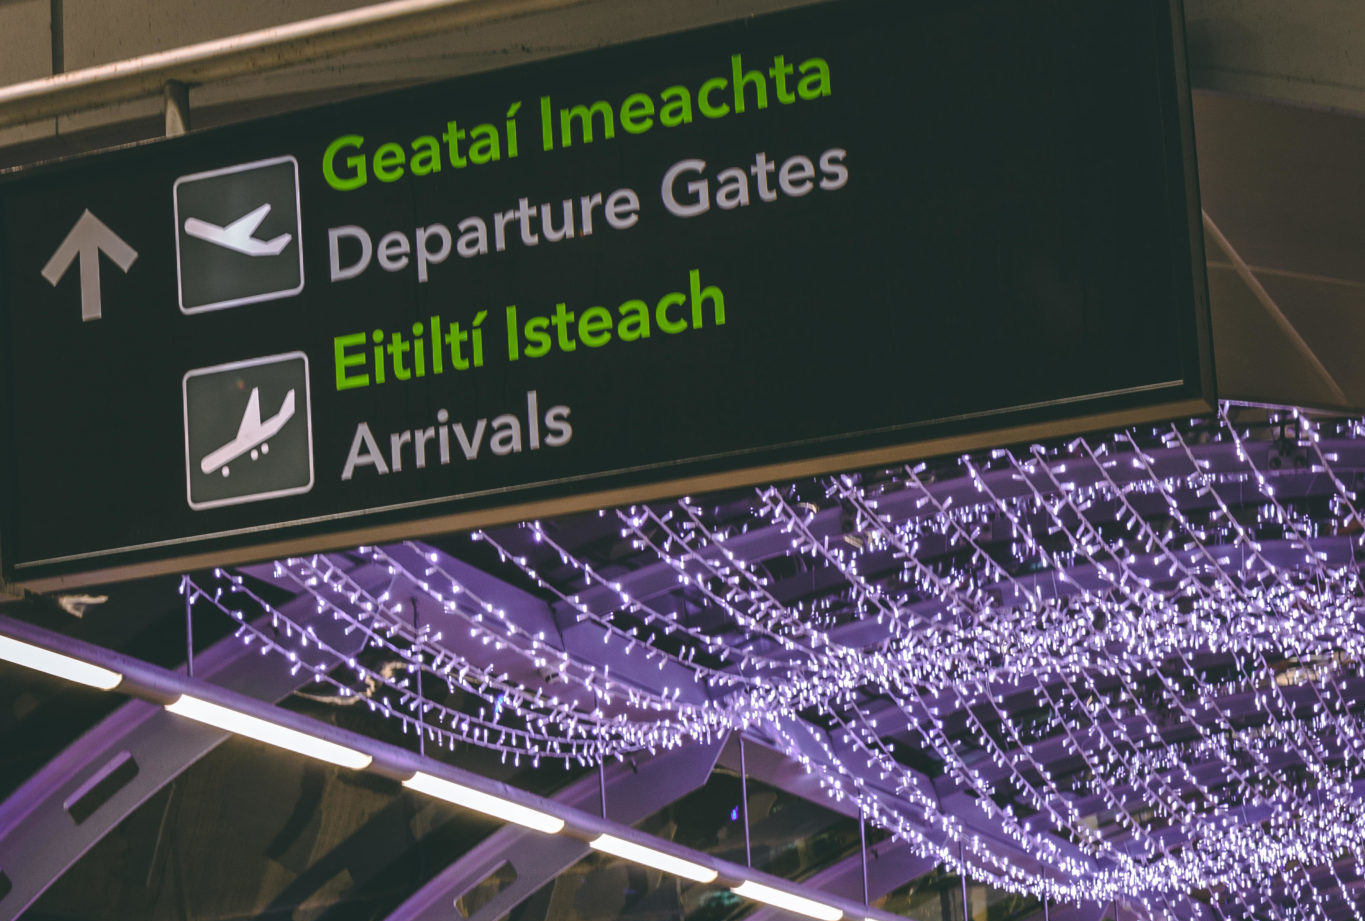 1.5 Million People Expected To Pass Through Dublin Airport This